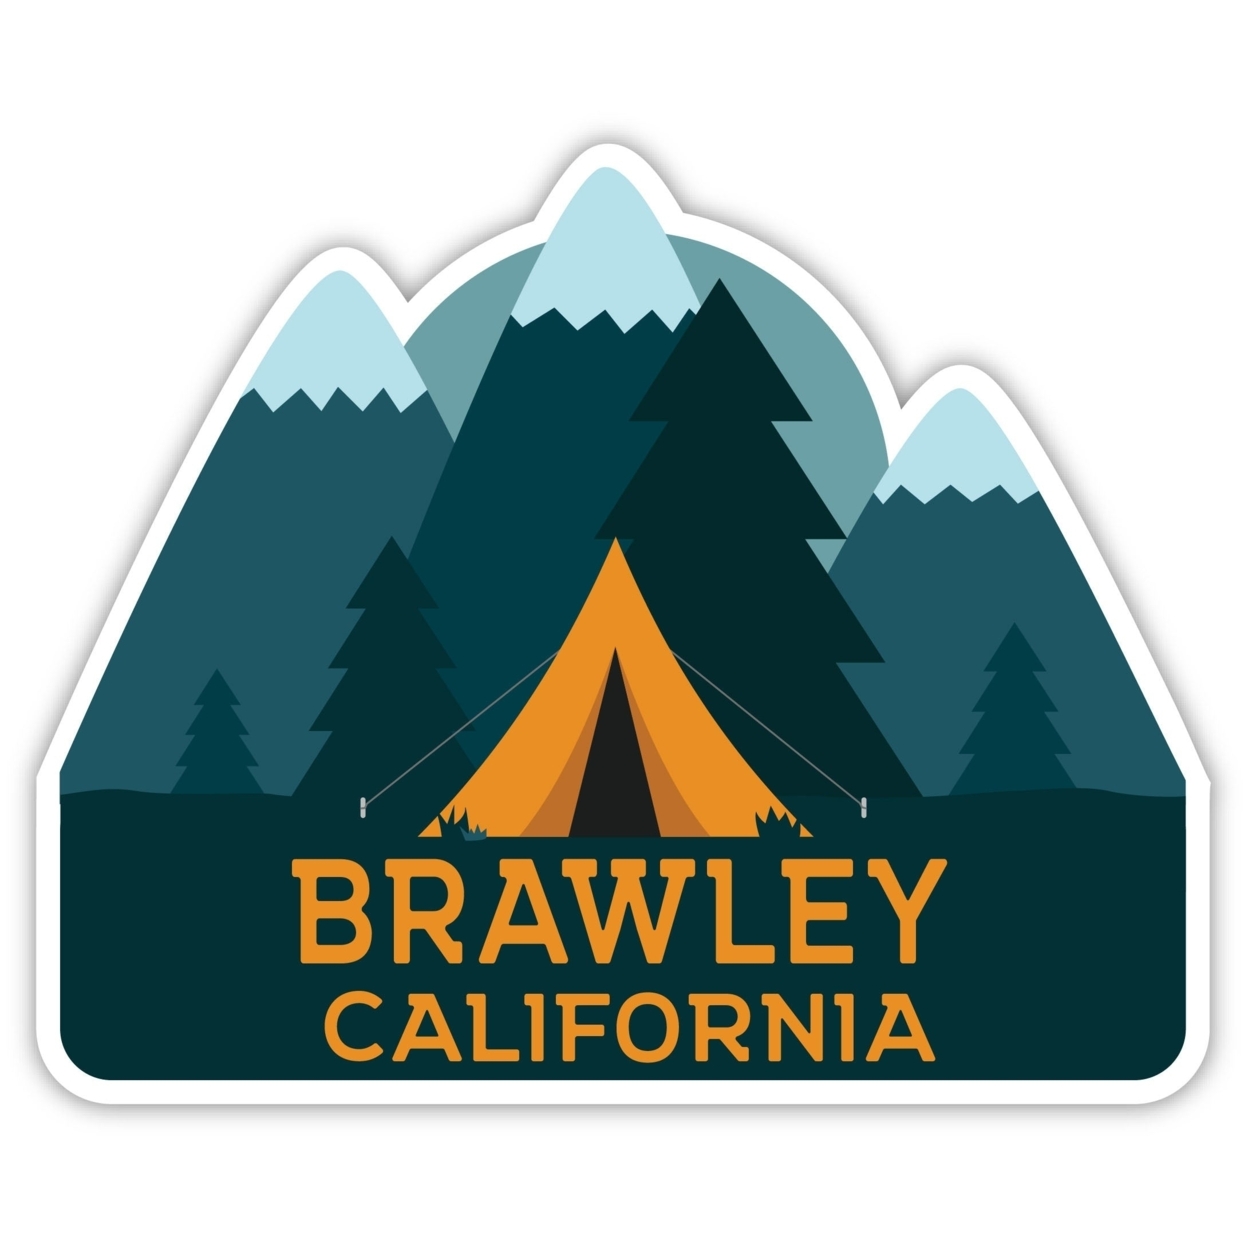 Brawley California Souvenir Decorative Stickers (Choose Theme And Size) - 4-Pack, 10-Inch, Tent